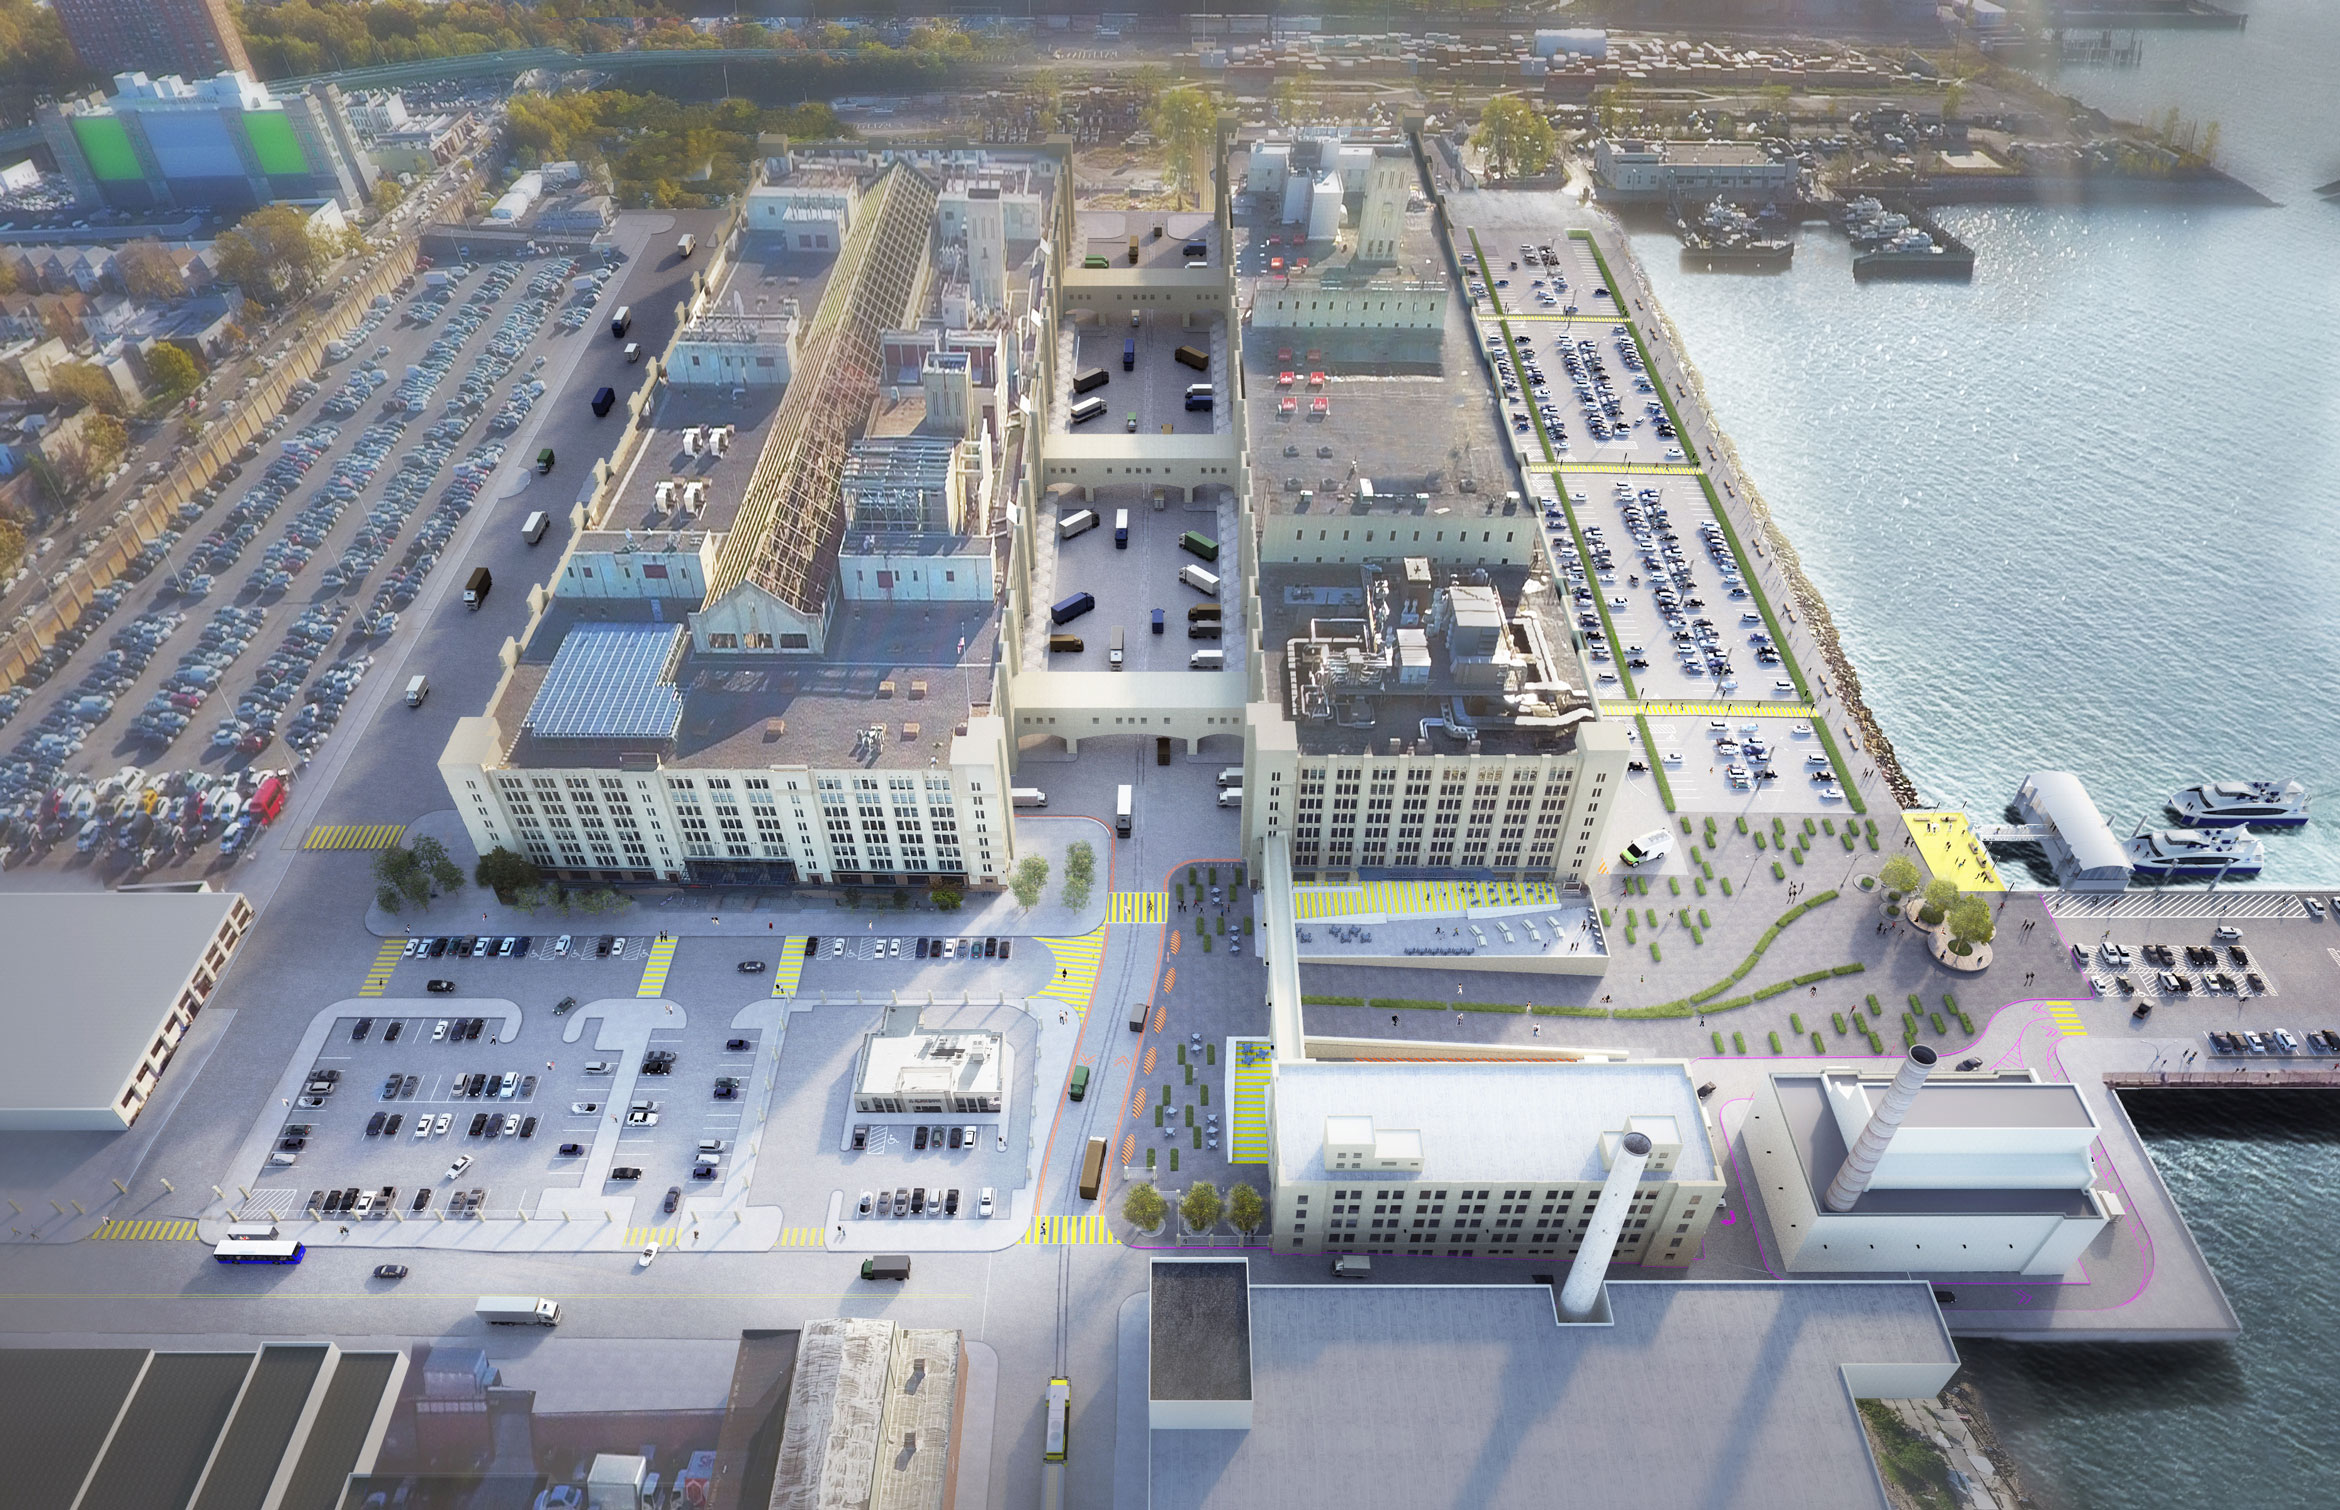 A rendering of the Brooklyn Army Terminal with an existing 8,400-square-foot array (used to power the terminal building itself) depicted on the roof, lower left. At 70,000 square feet, the Sunset Park Solar array will cover a majority of the remaining roof space. Image courtesy of New York City Economic Development Corporation